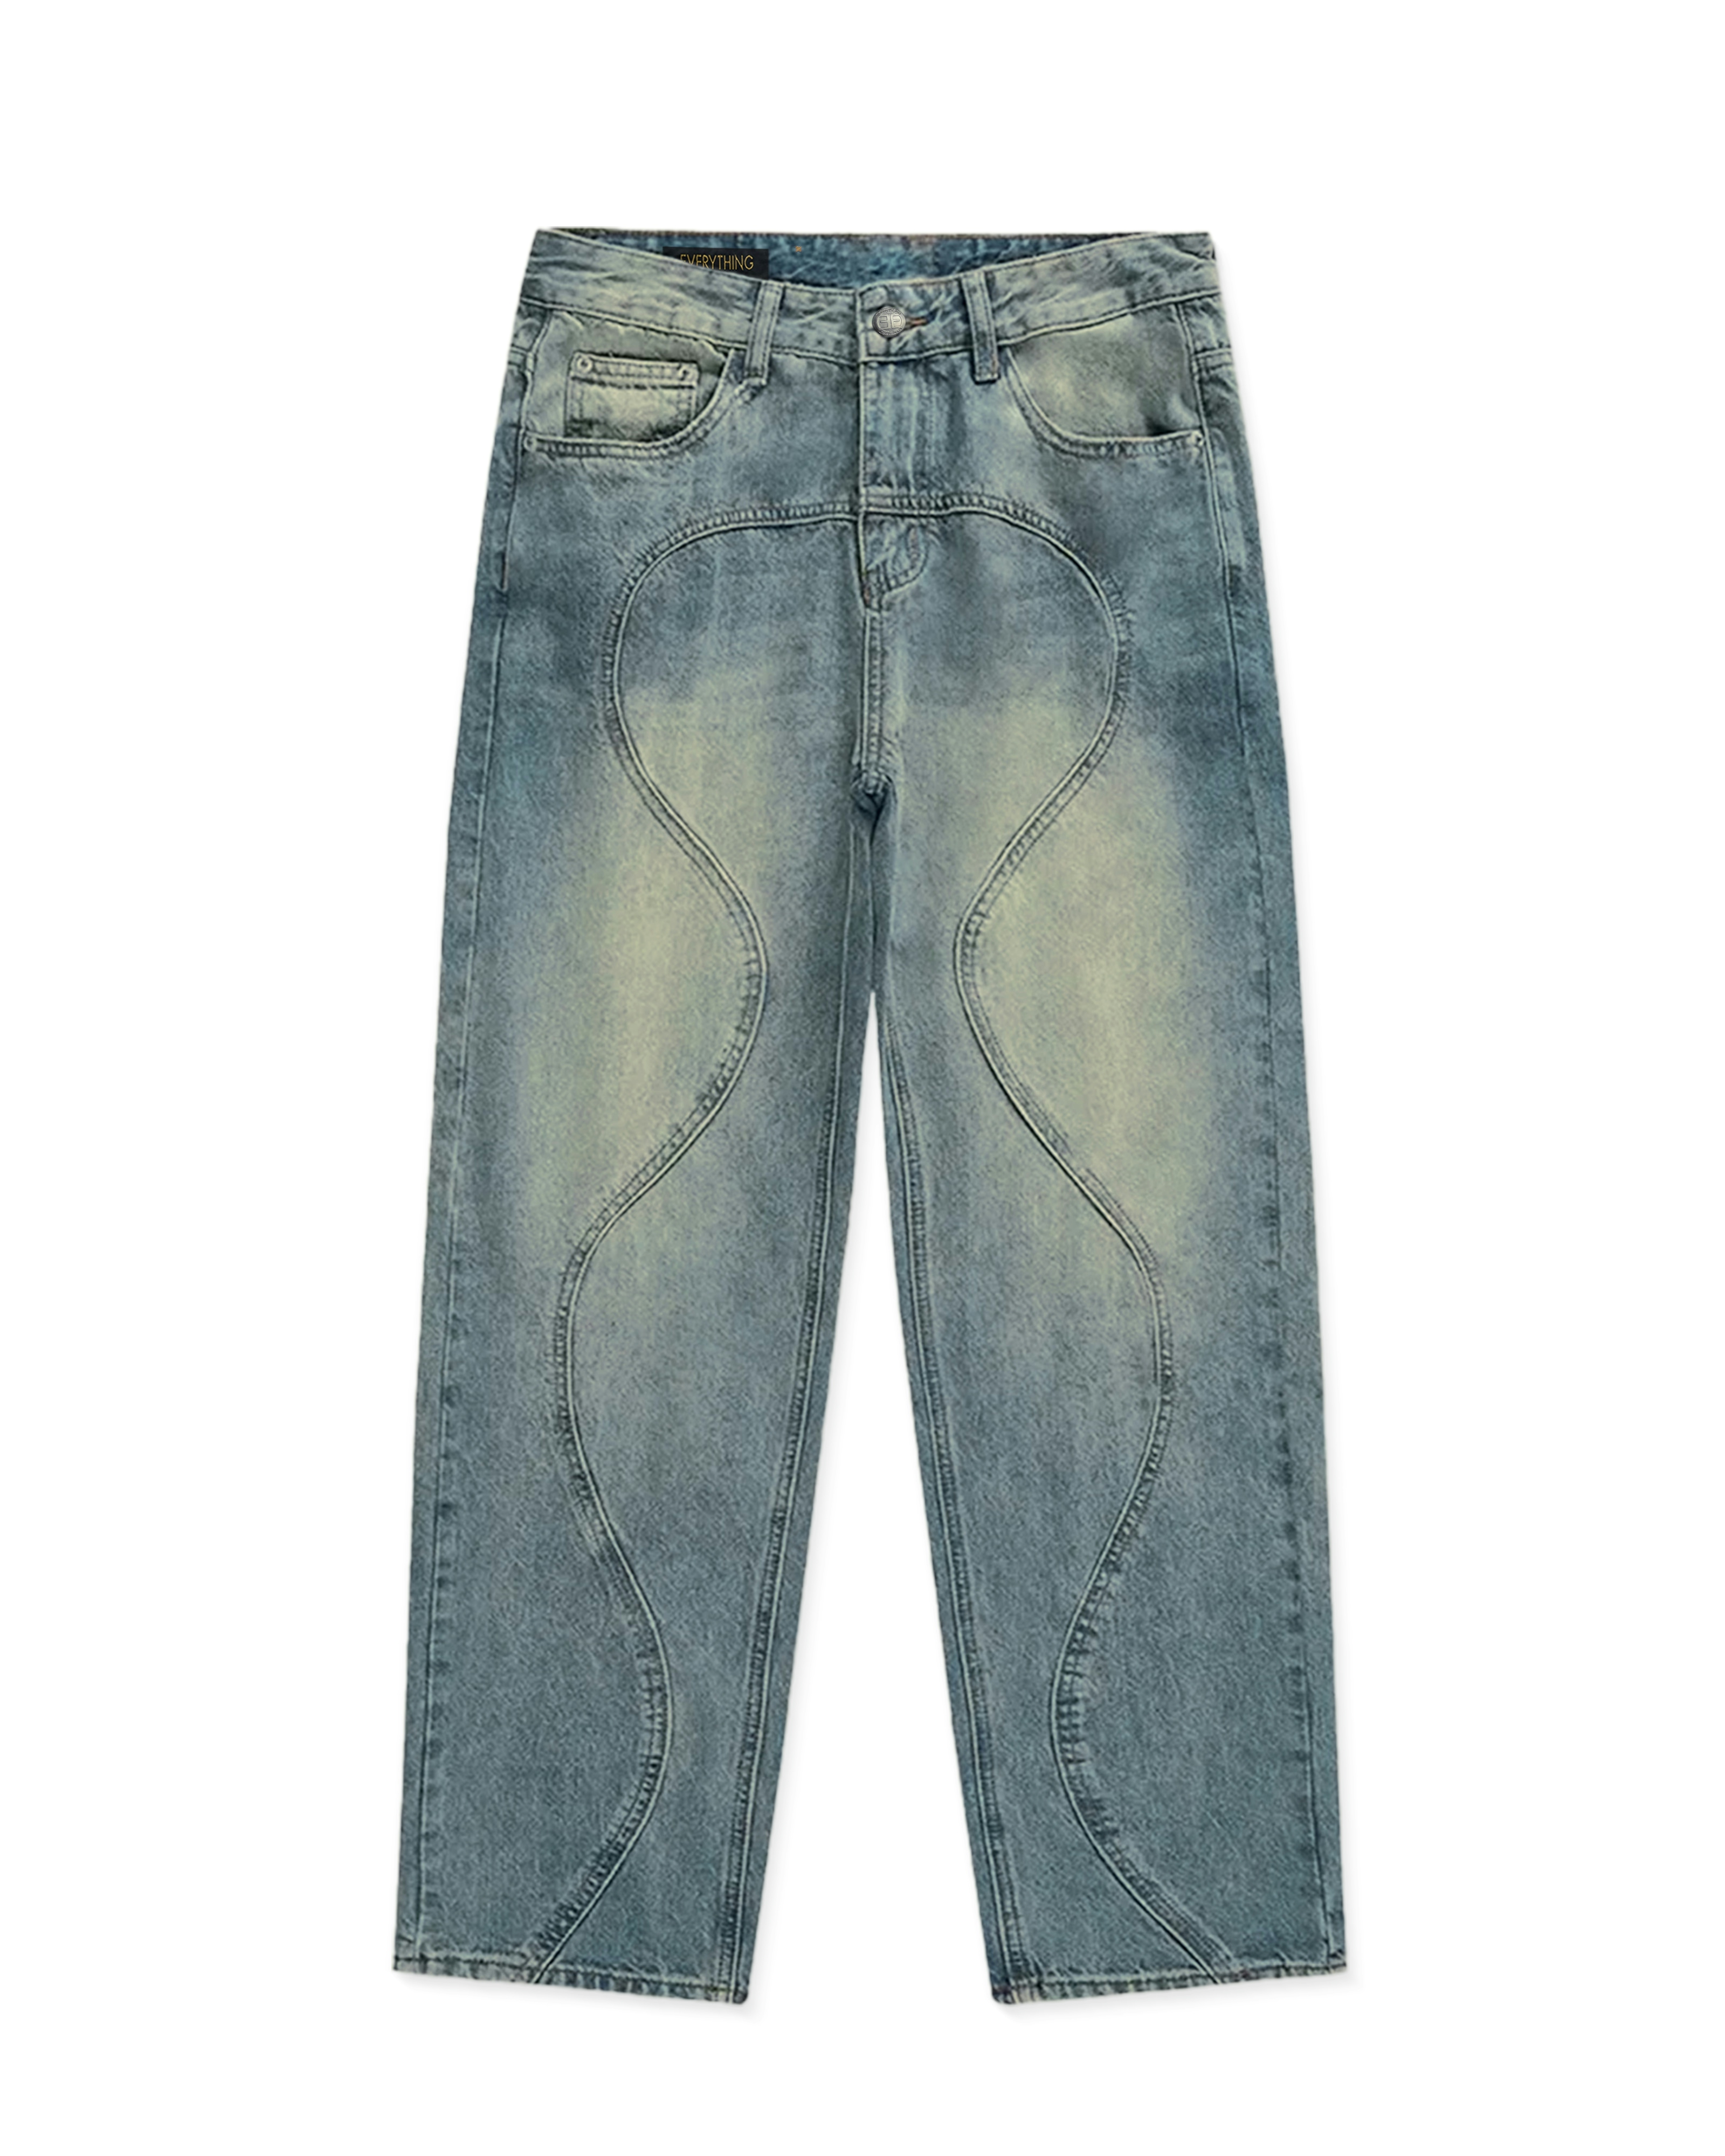 Waved baggy jeans